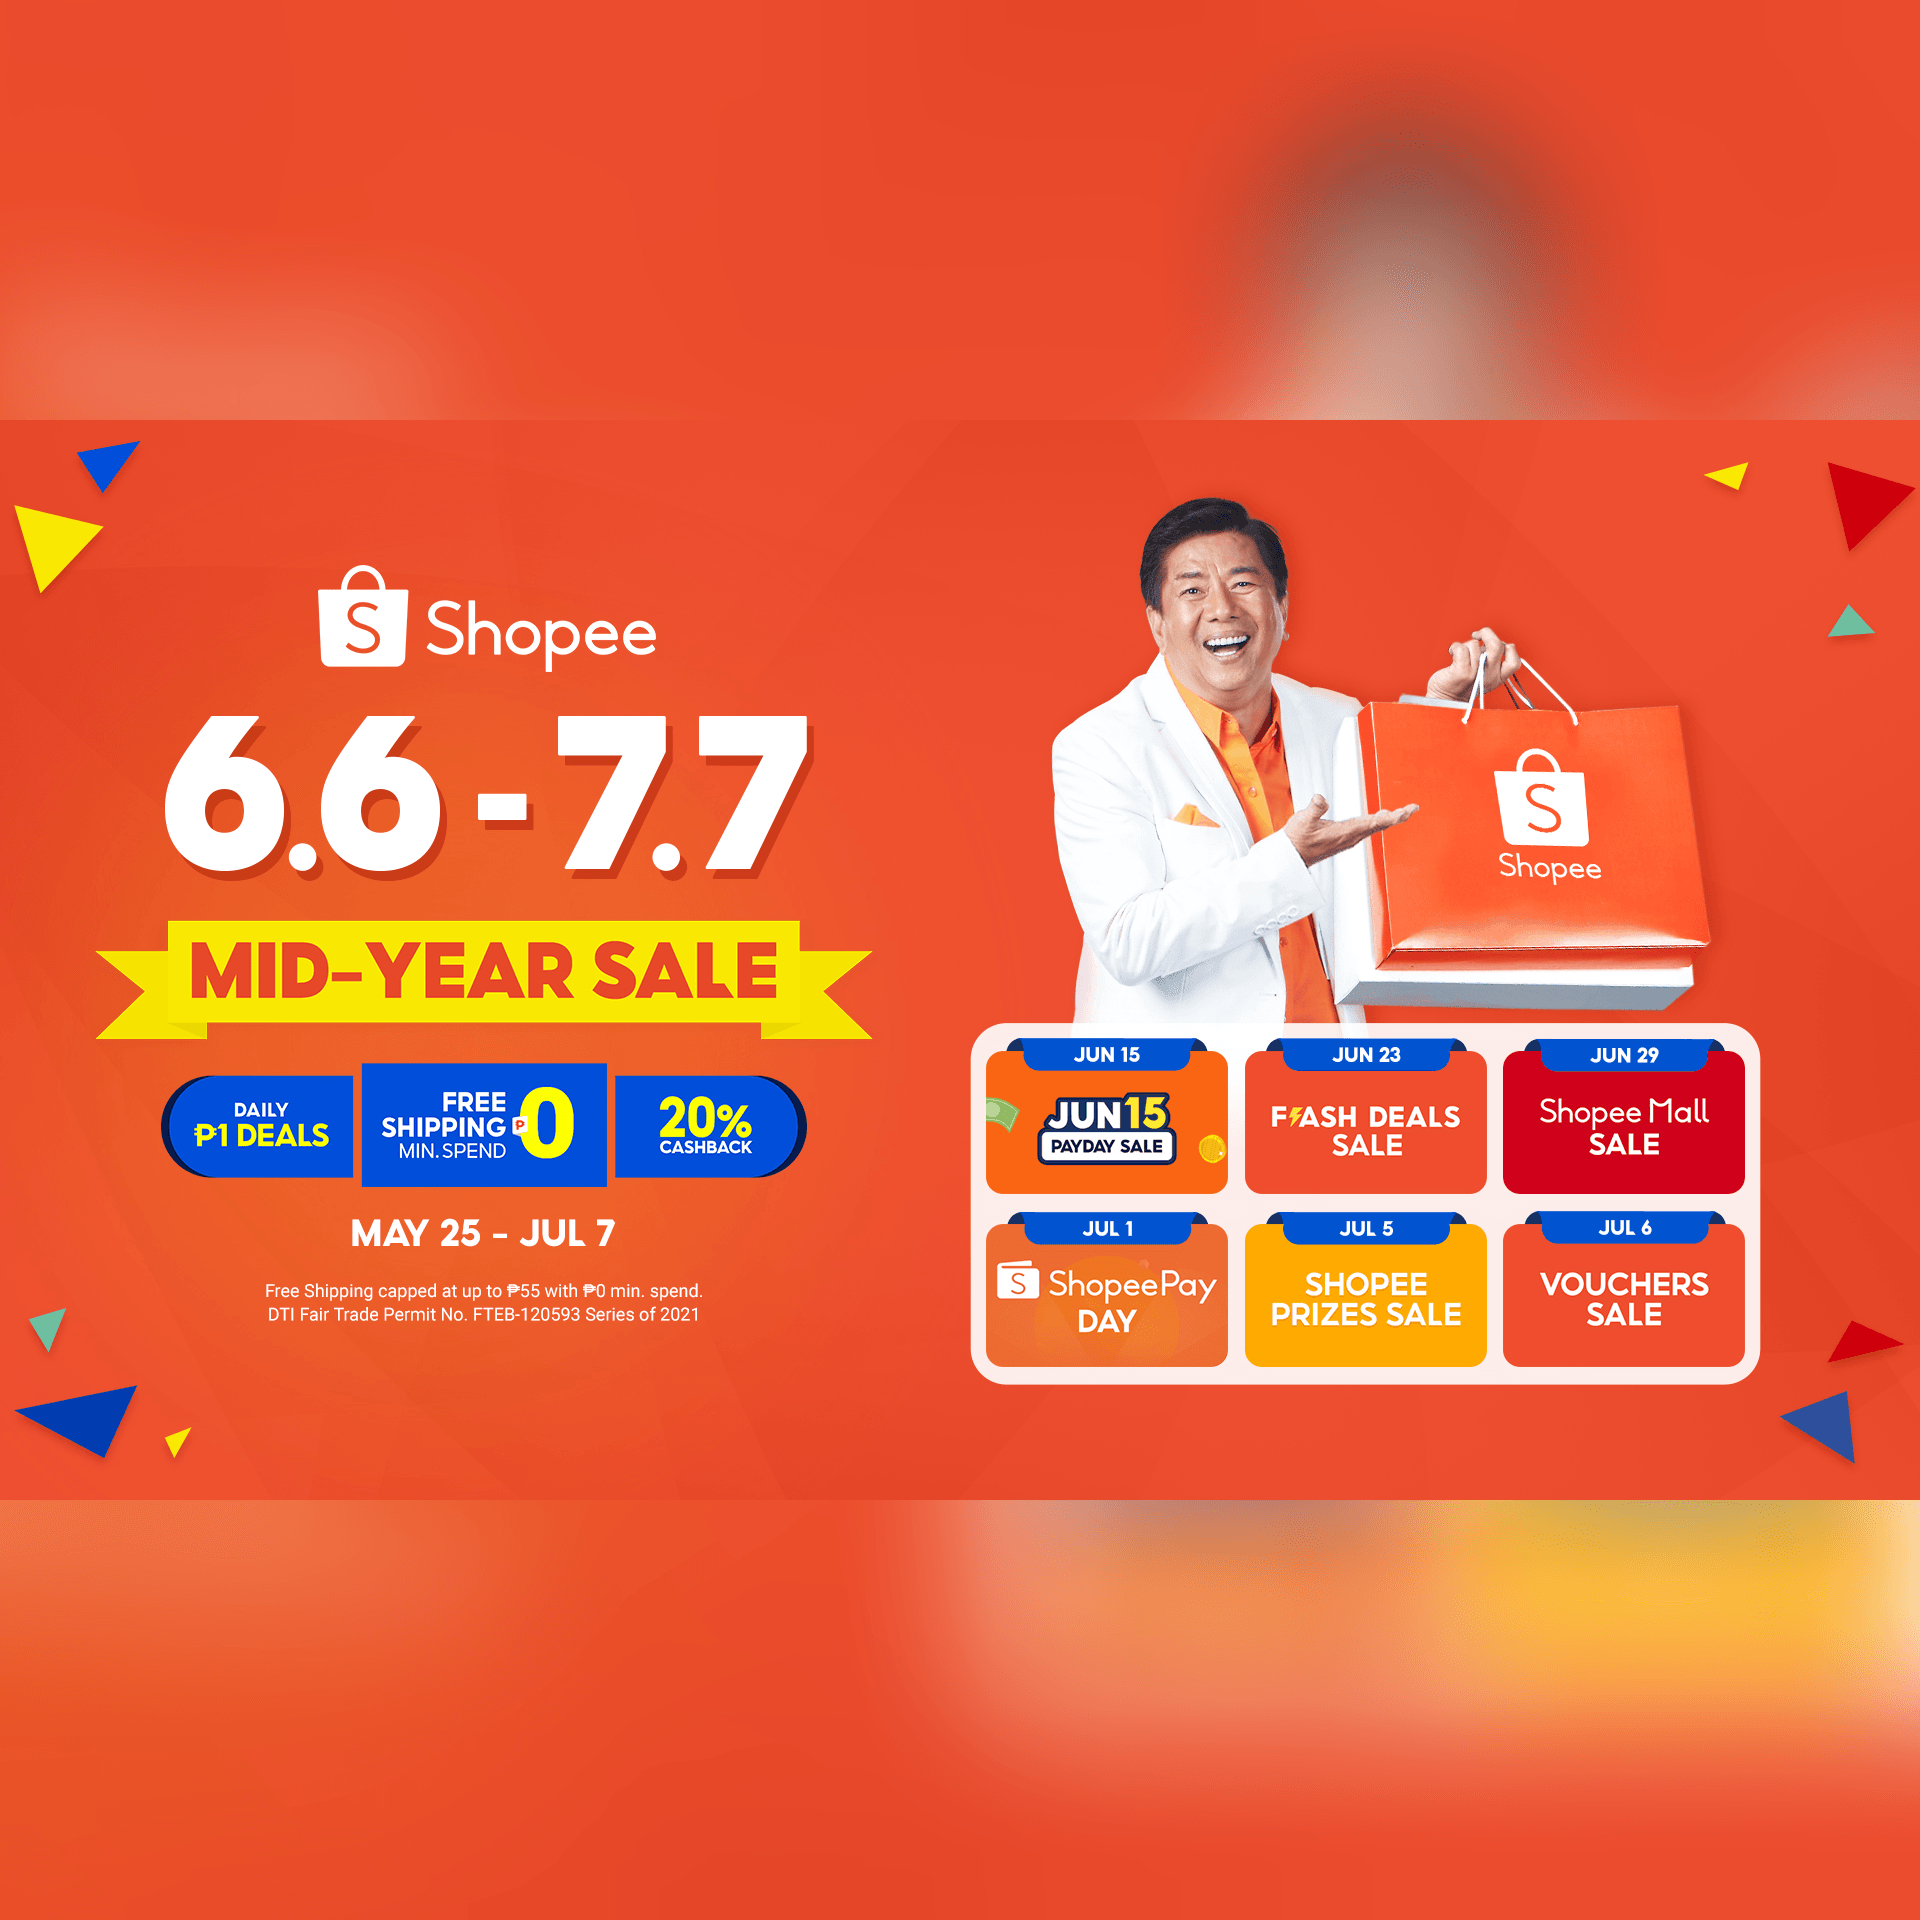 6 themed sales to look out for at Shopee’s 6.6-7.7 Mid-Year Sale